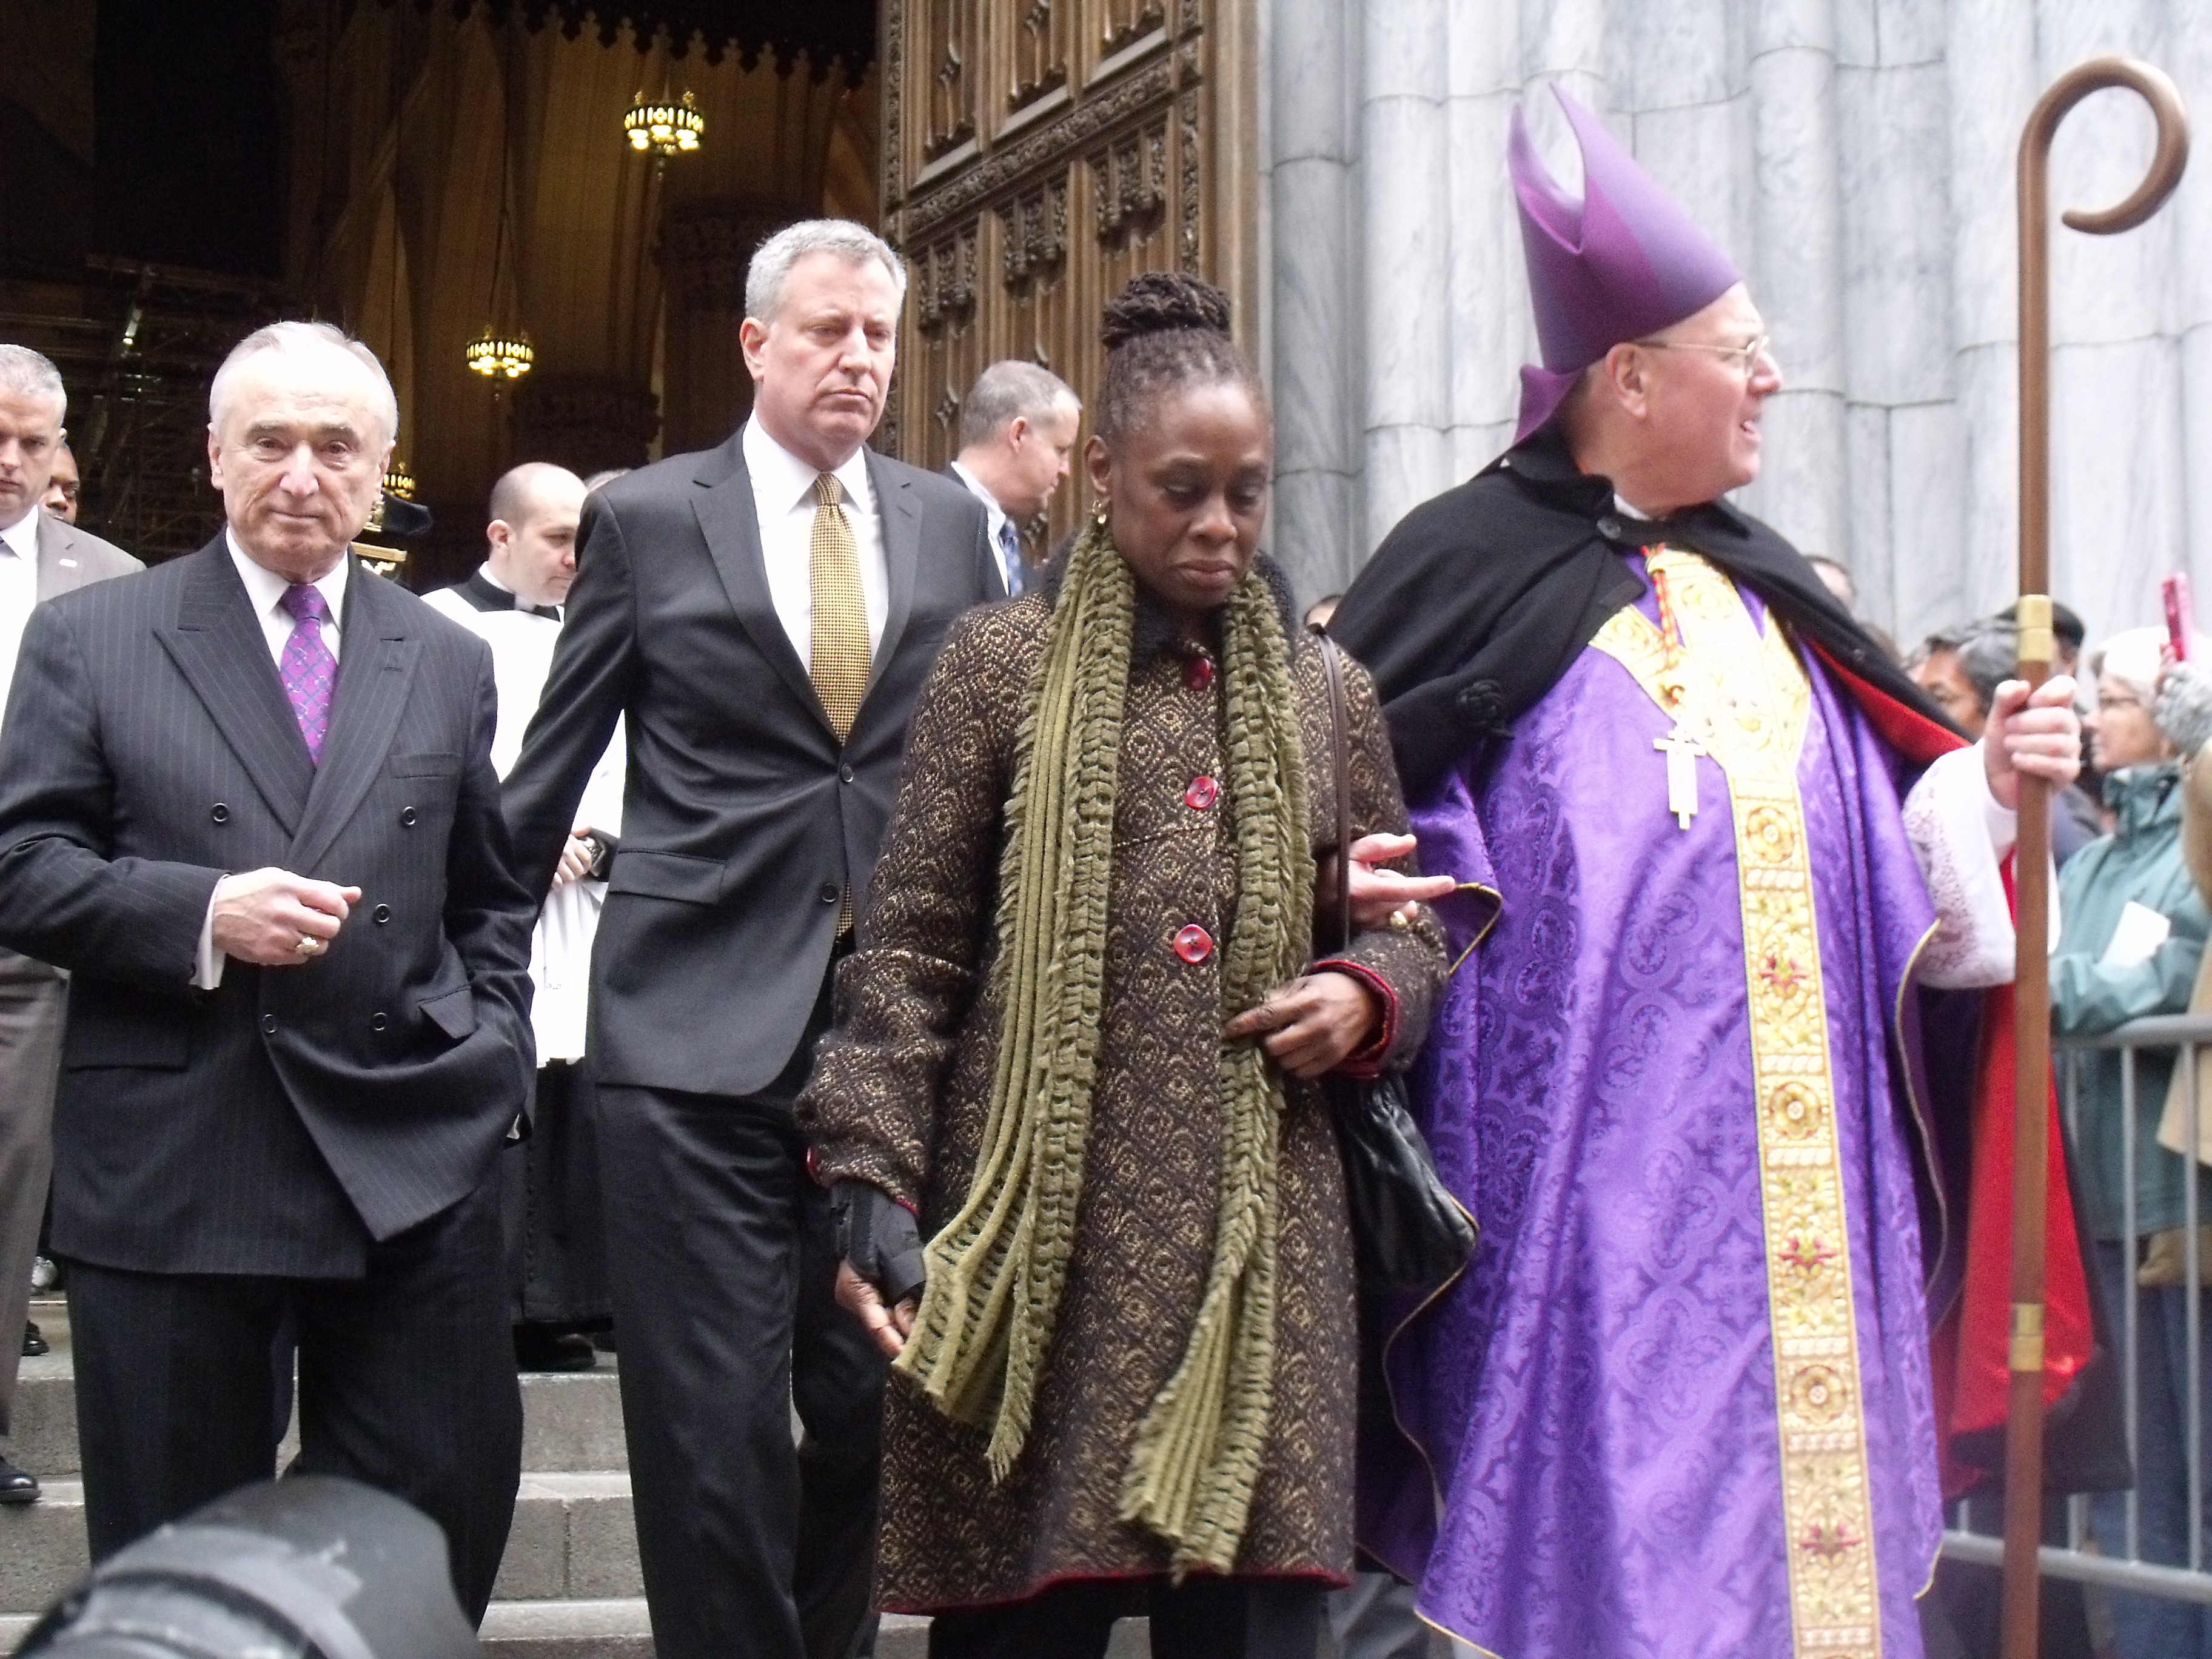 Police Commissioner Bill Bratton, Mayor Bill de Blasio, first lady Chirlane McCray and Cardinal Timothy Dolan leave St. Patrick's Cathedral this morning. (Photo: Jillian Jorgensen)